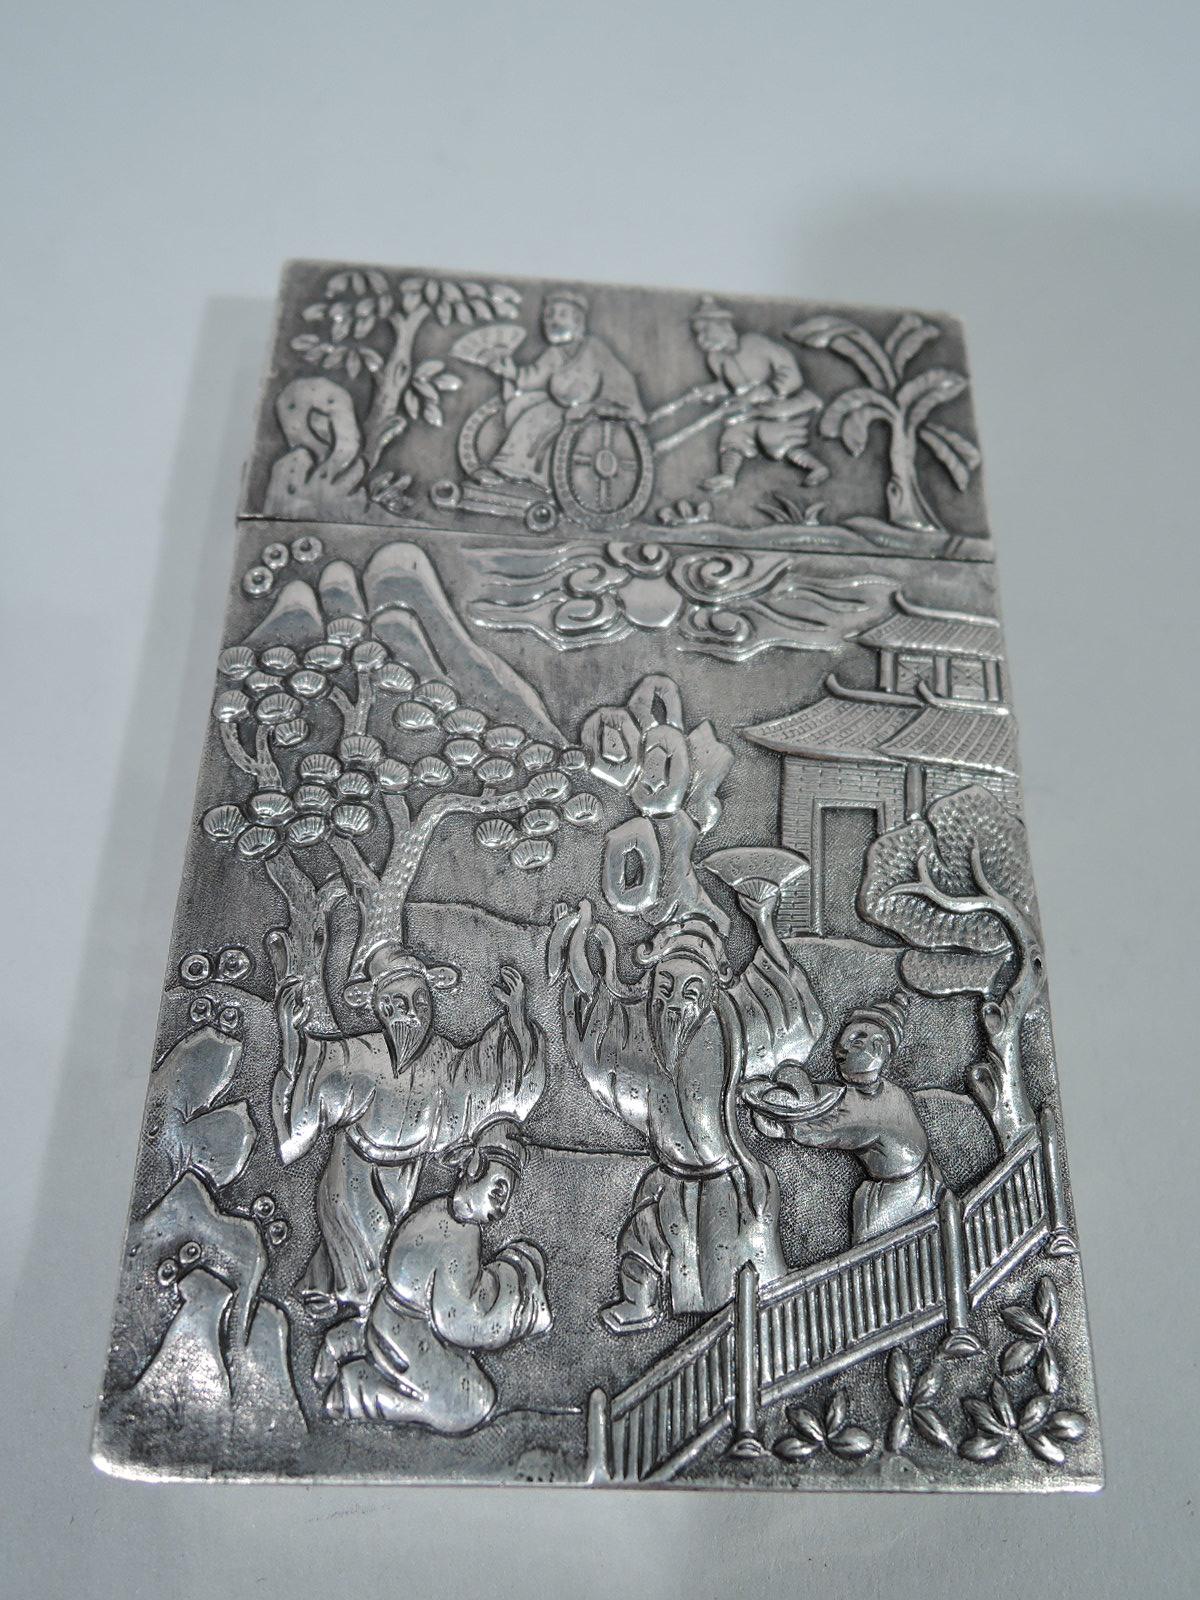 Chinese export silver card case. Narrow and rectangular with straight sides and crisp corners. Chased and embossed scenes with modish exotics: Chinamen in funny gowns and hats with pavilions and blossoming trees in background. A real period piece -